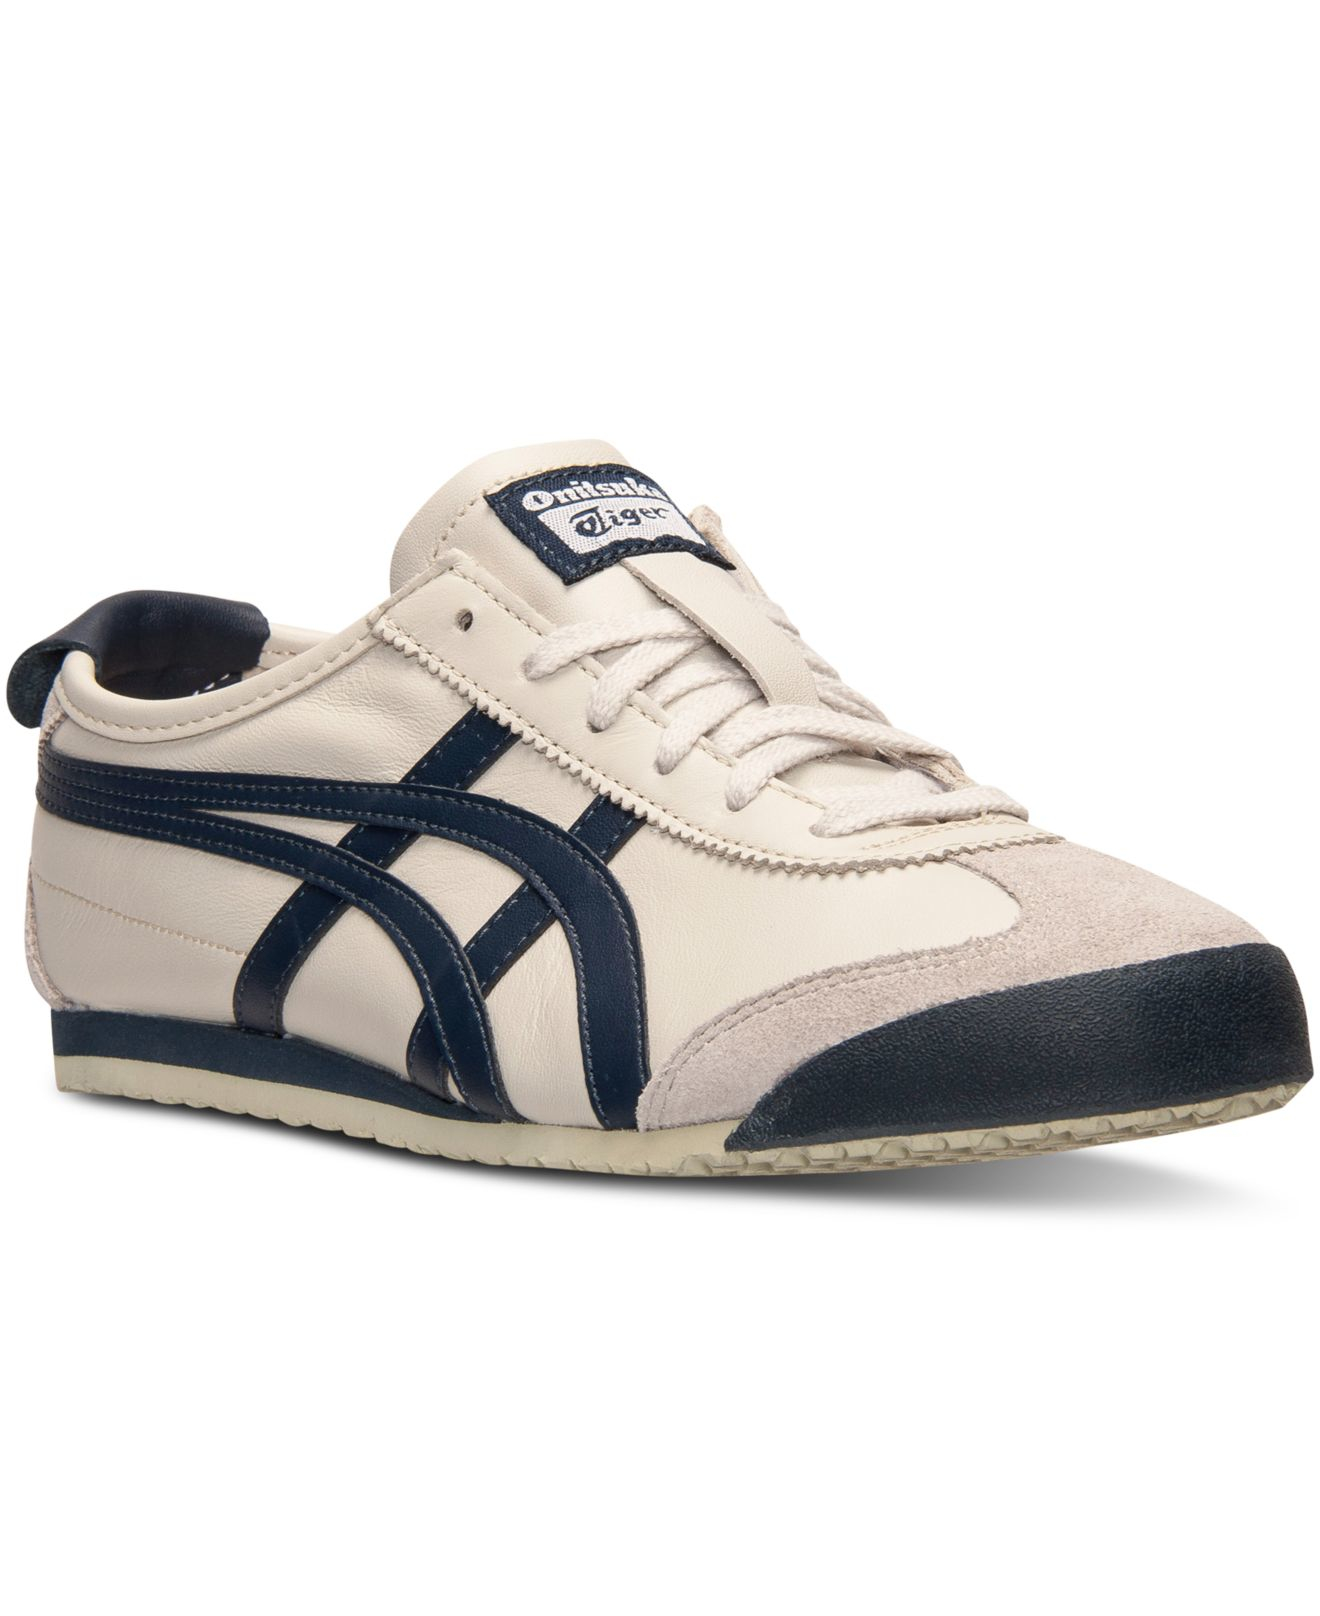 Lyst - Asics Men's Onitsuka Tiger Mexico 66 Casual Sneakers From Finish